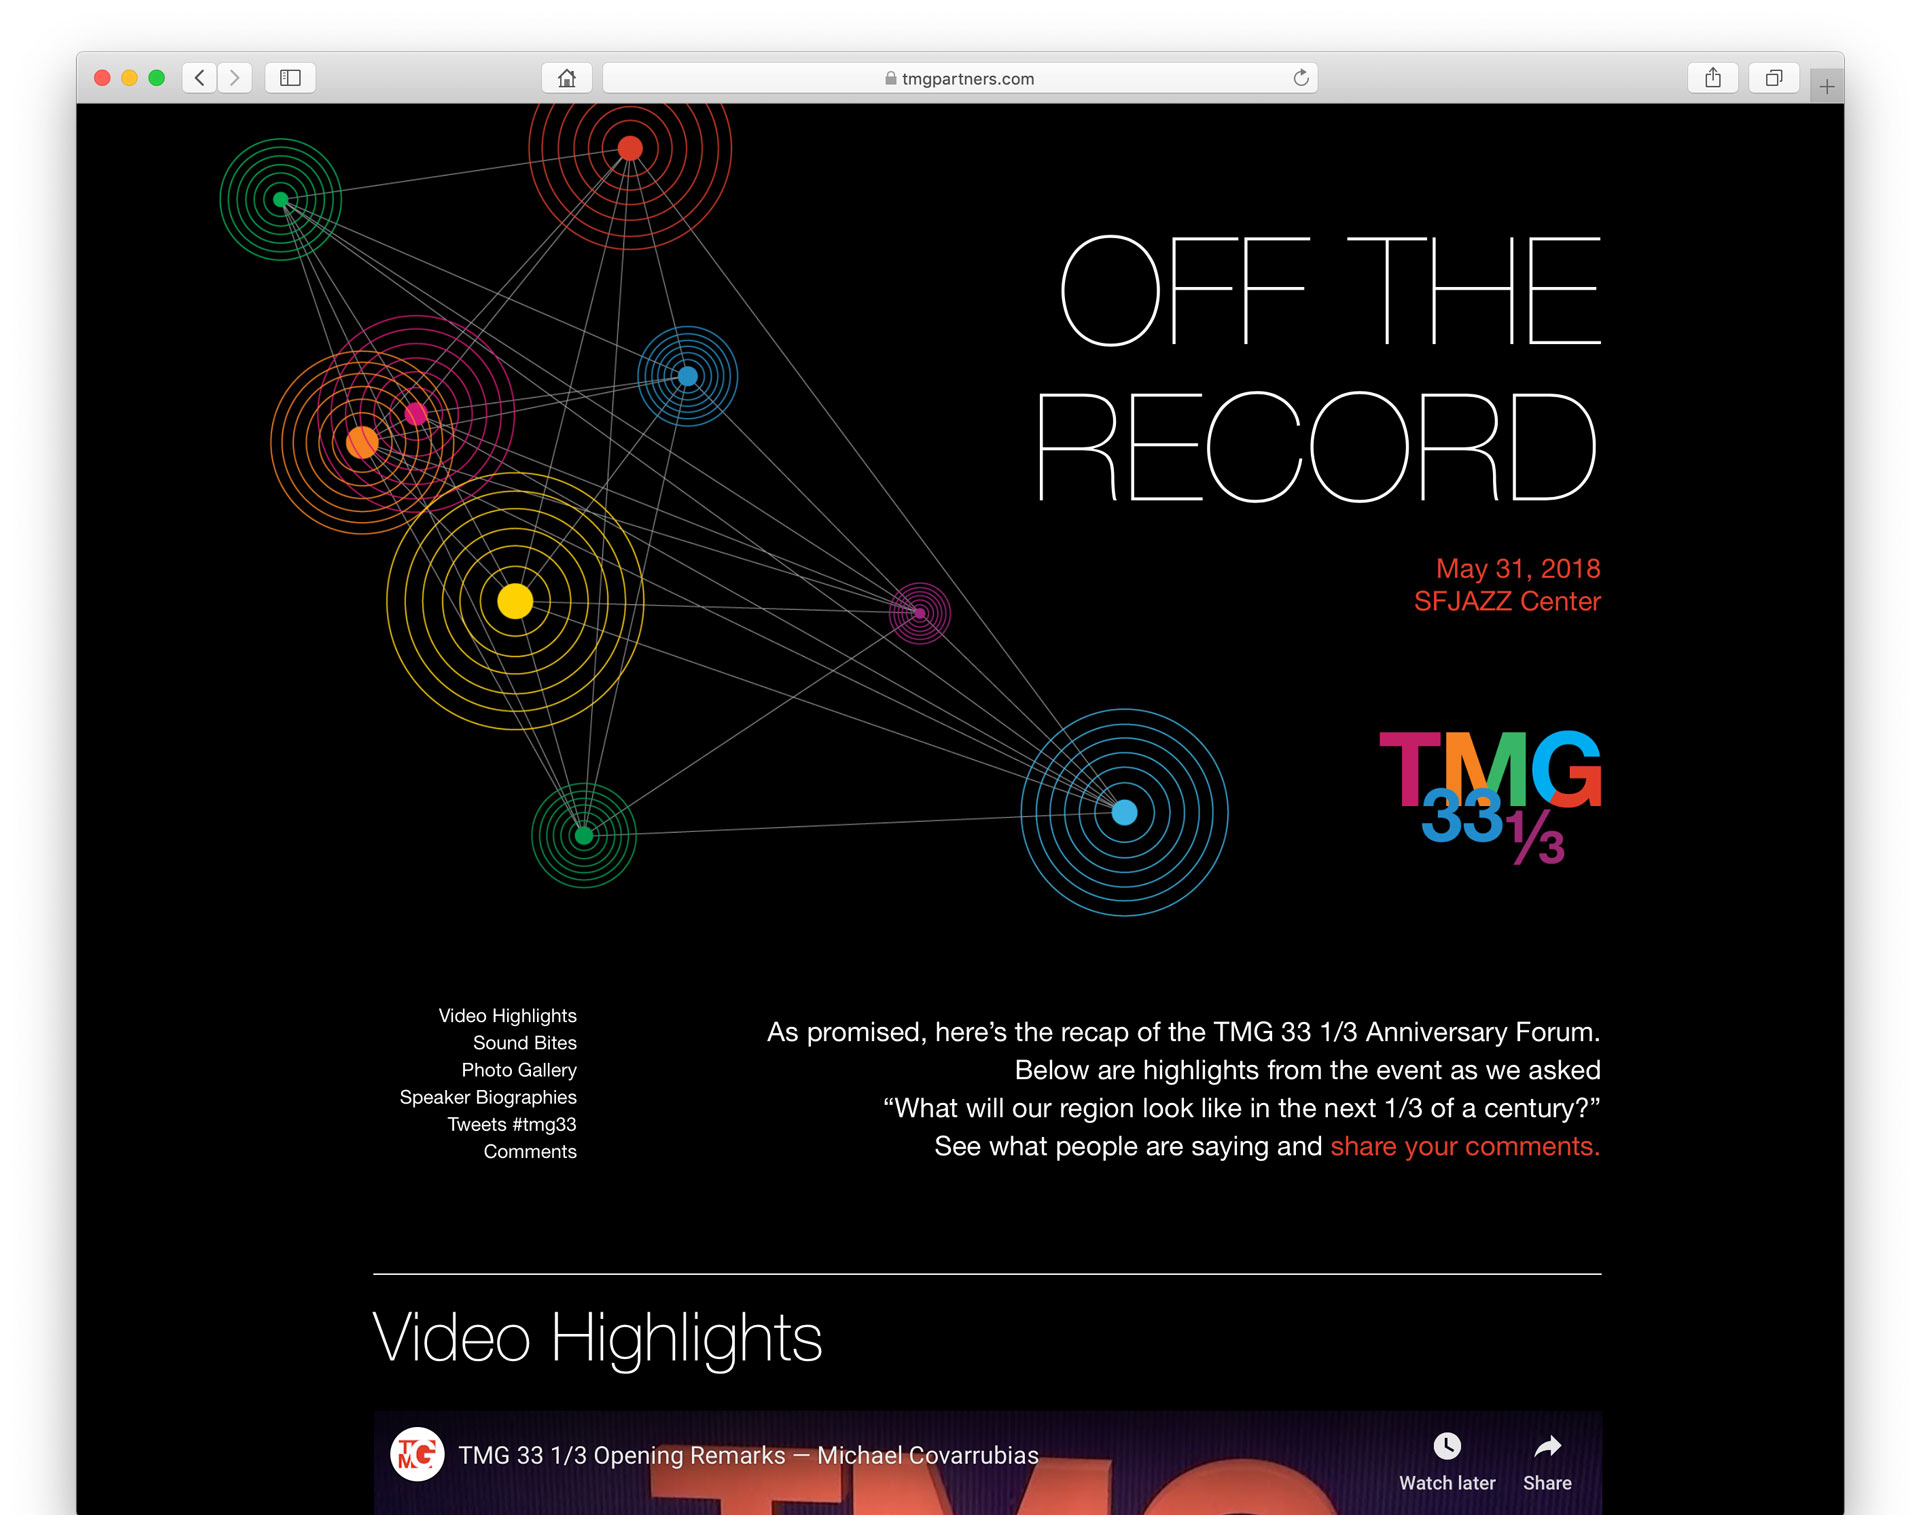 Screenshot of event web page showing logo and text: Off the Record.